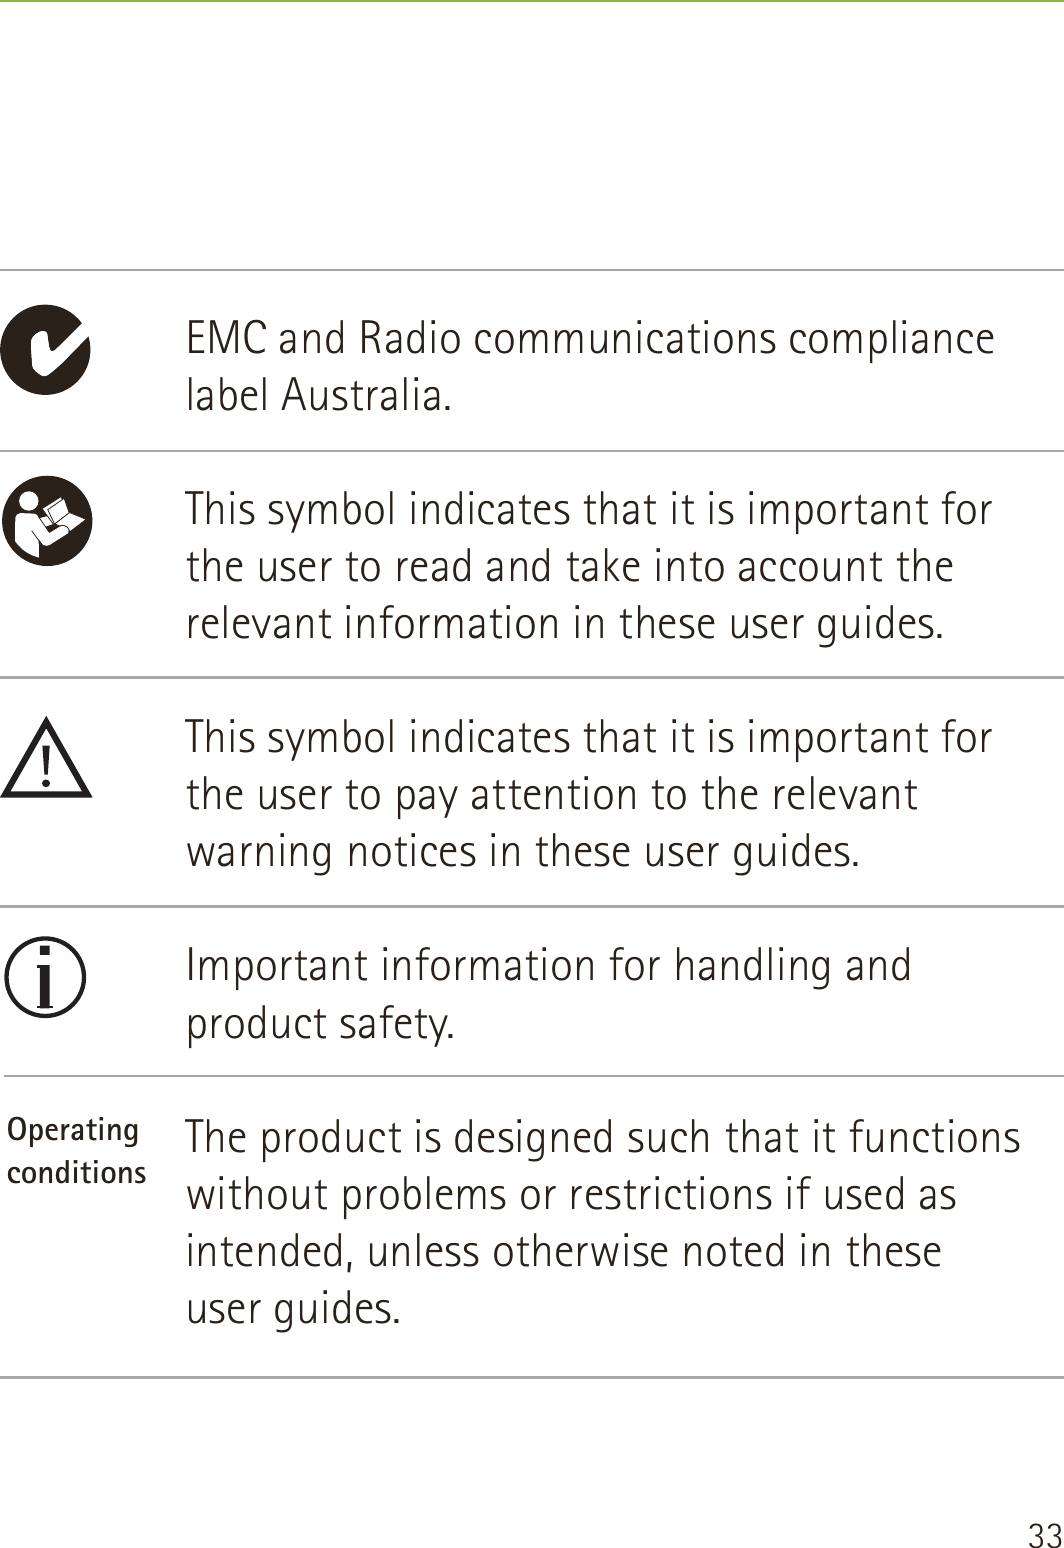 33EMC and Radio communications compliance label Australia.This symbol indicates that it is important for the user to read and take into account the relevant information in these user guides.This symbol indicates that it is important for the user to pay attention to the relevant warning notices in these user guides.Important information for handling and product safety.The product is designed such that it functions without problems or restrictions if used as intended, unless otherwise noted in these  user guides.Operatingconditions